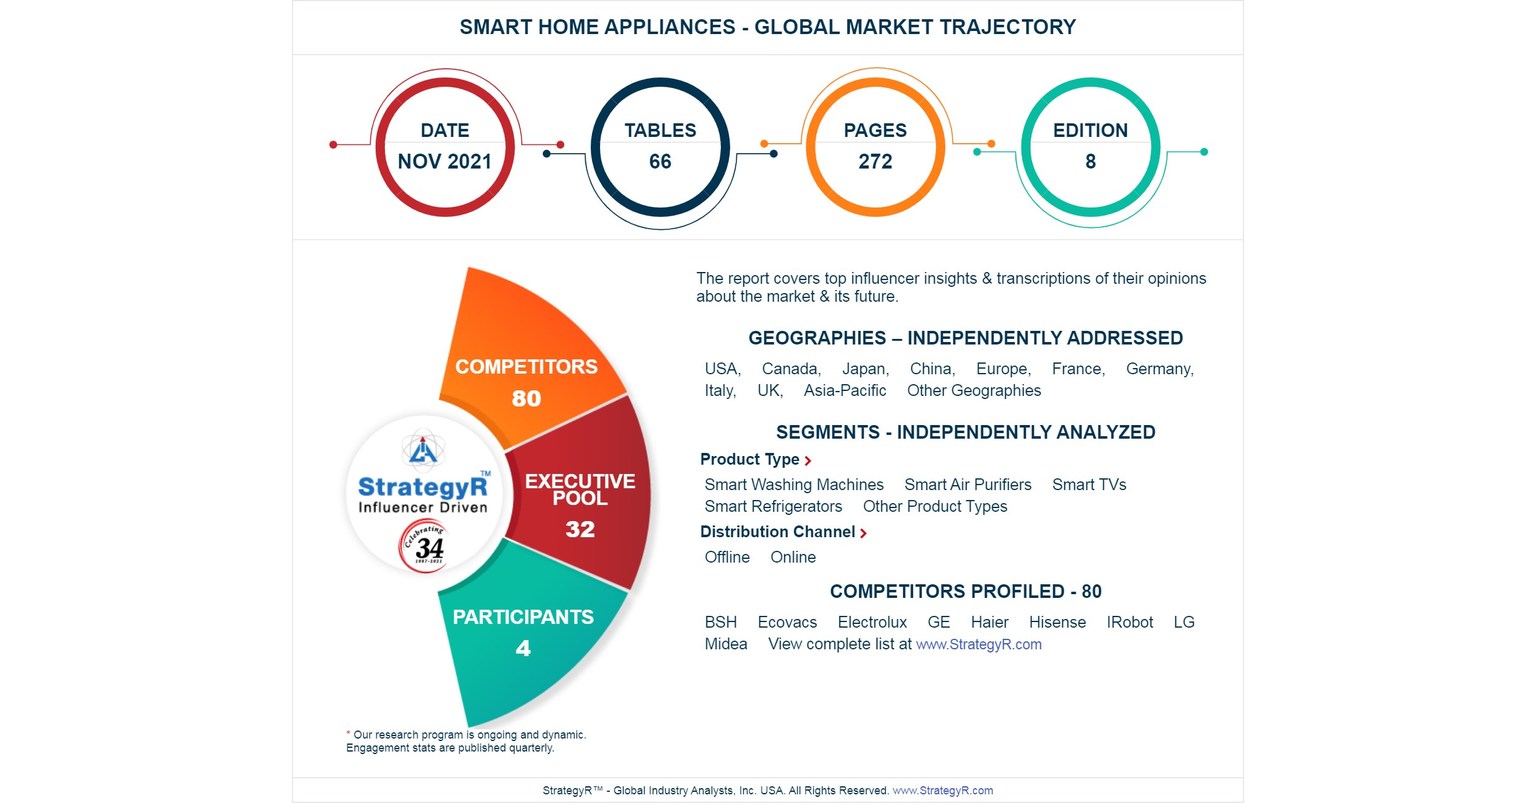 Top 5 Companies in the Smart Home Appliances Industry